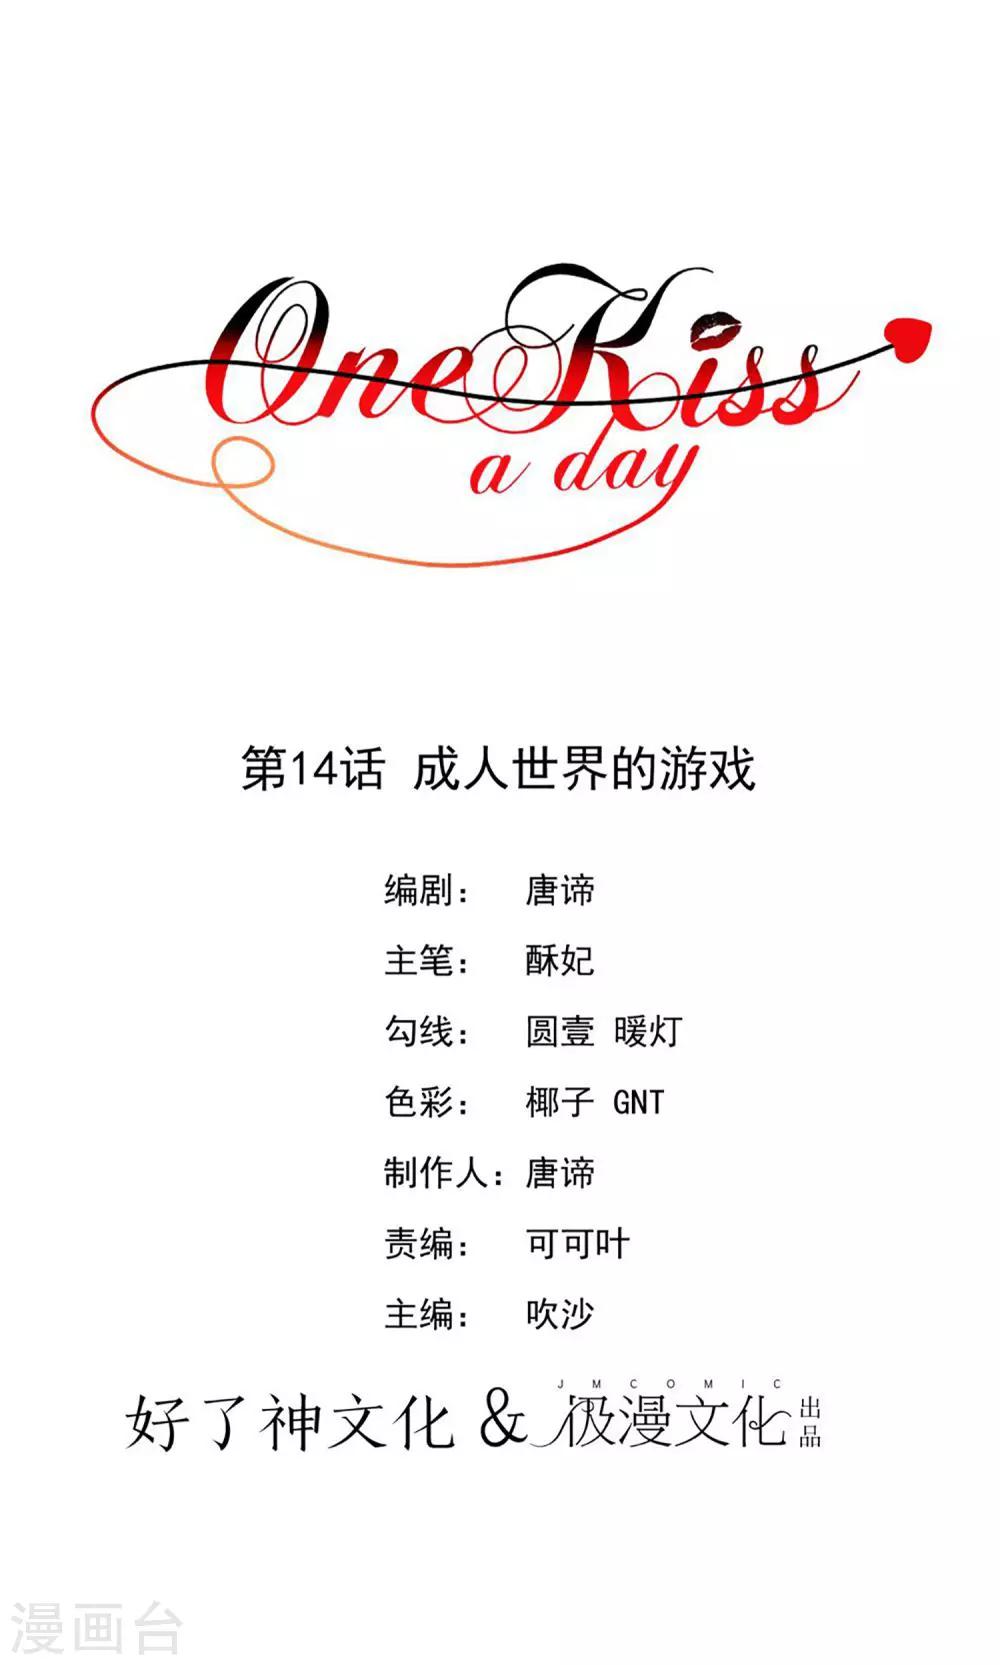 One Kiss A Day - 第14话 成人世界的游戏 - 1